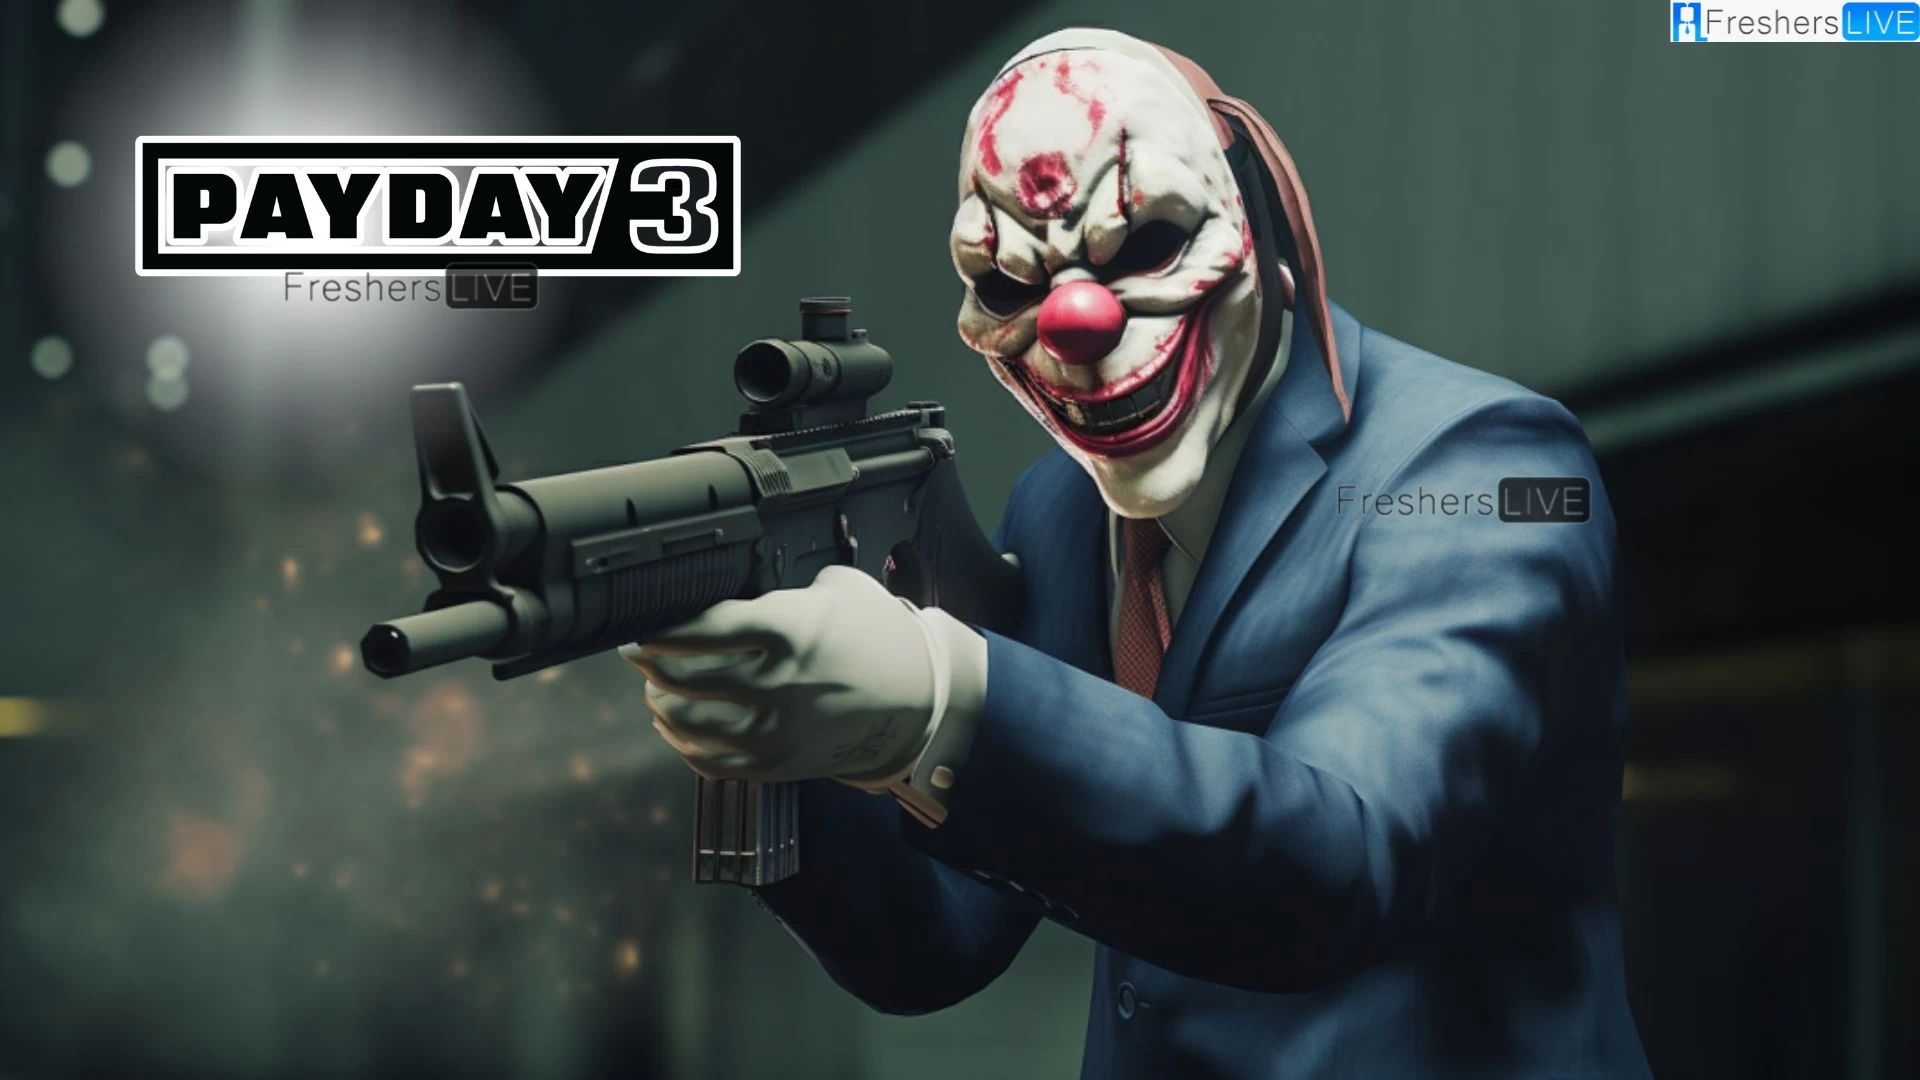 Payday 3 Best Heists to Make Cash Fast, How to Earn Cash Easily in Payday 3?